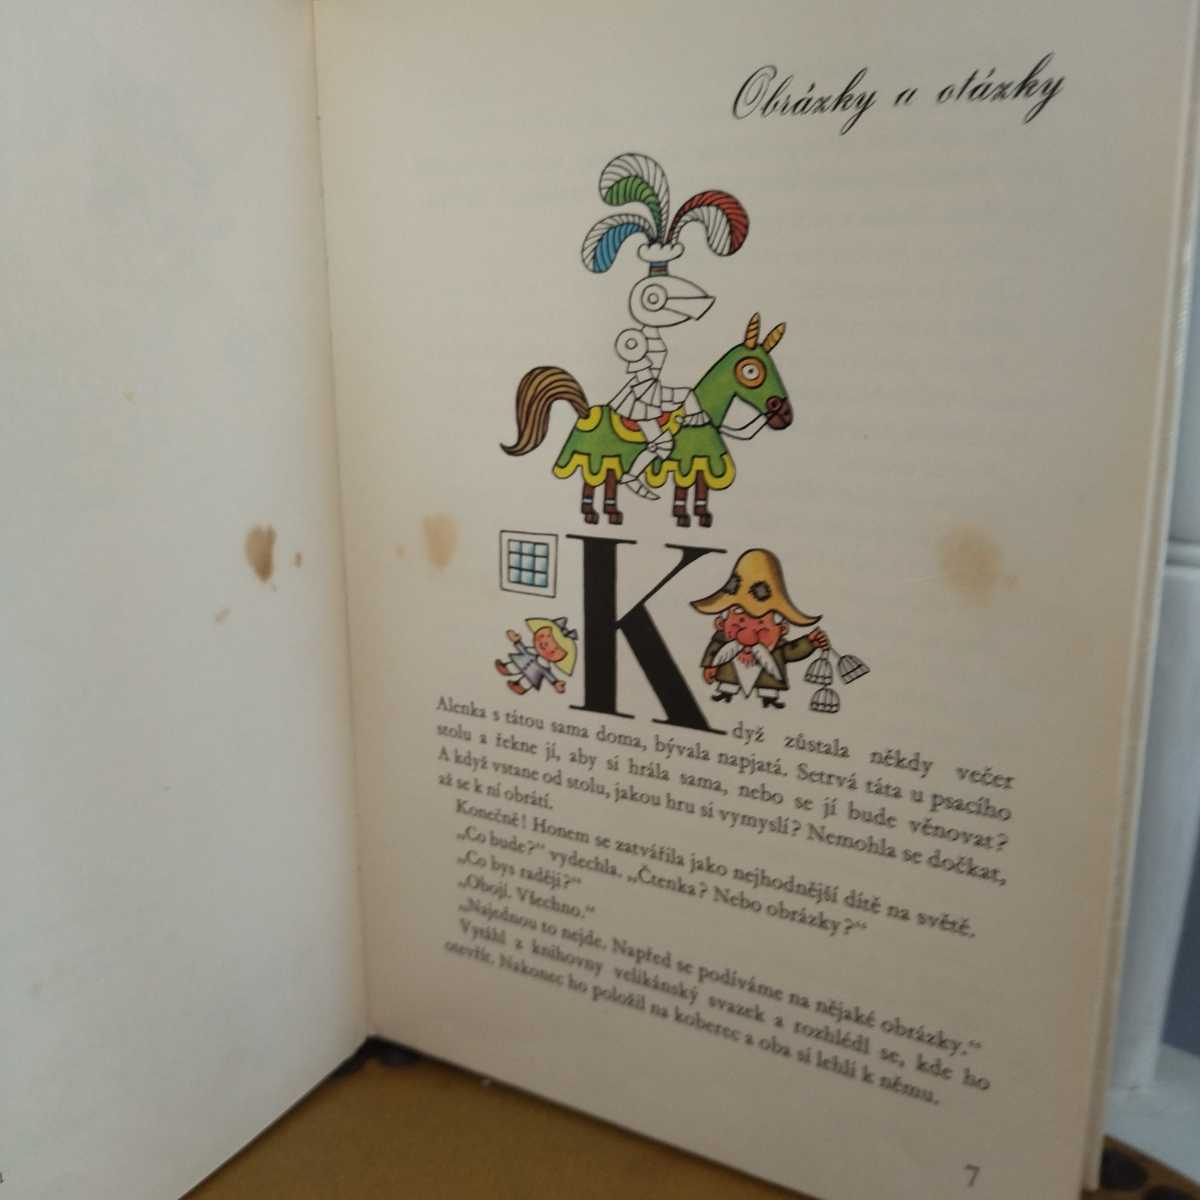 1971 Vintage picture book he Rena *zmato Lee kova- the first version Czech higashi . Northern Europe illustration rare 